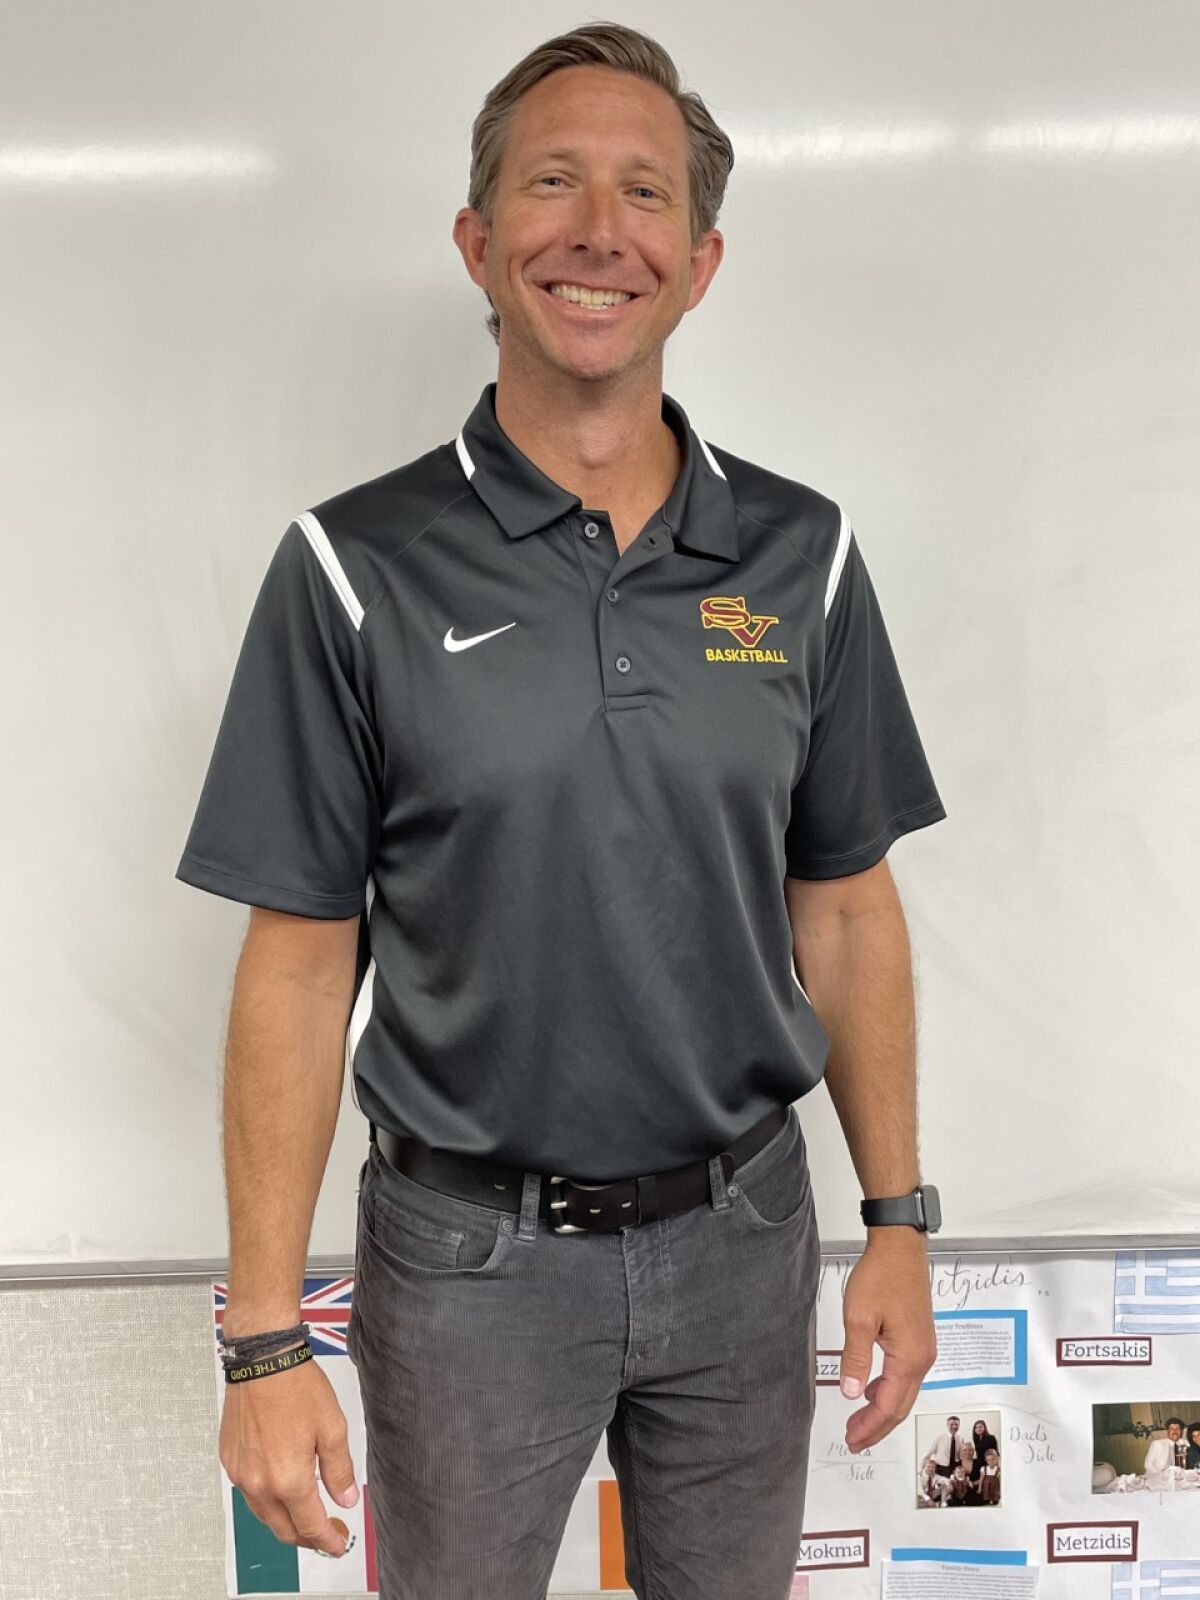 New Simi Valley basketball coach Craig Griffin, who coached for 20 years at Royal.